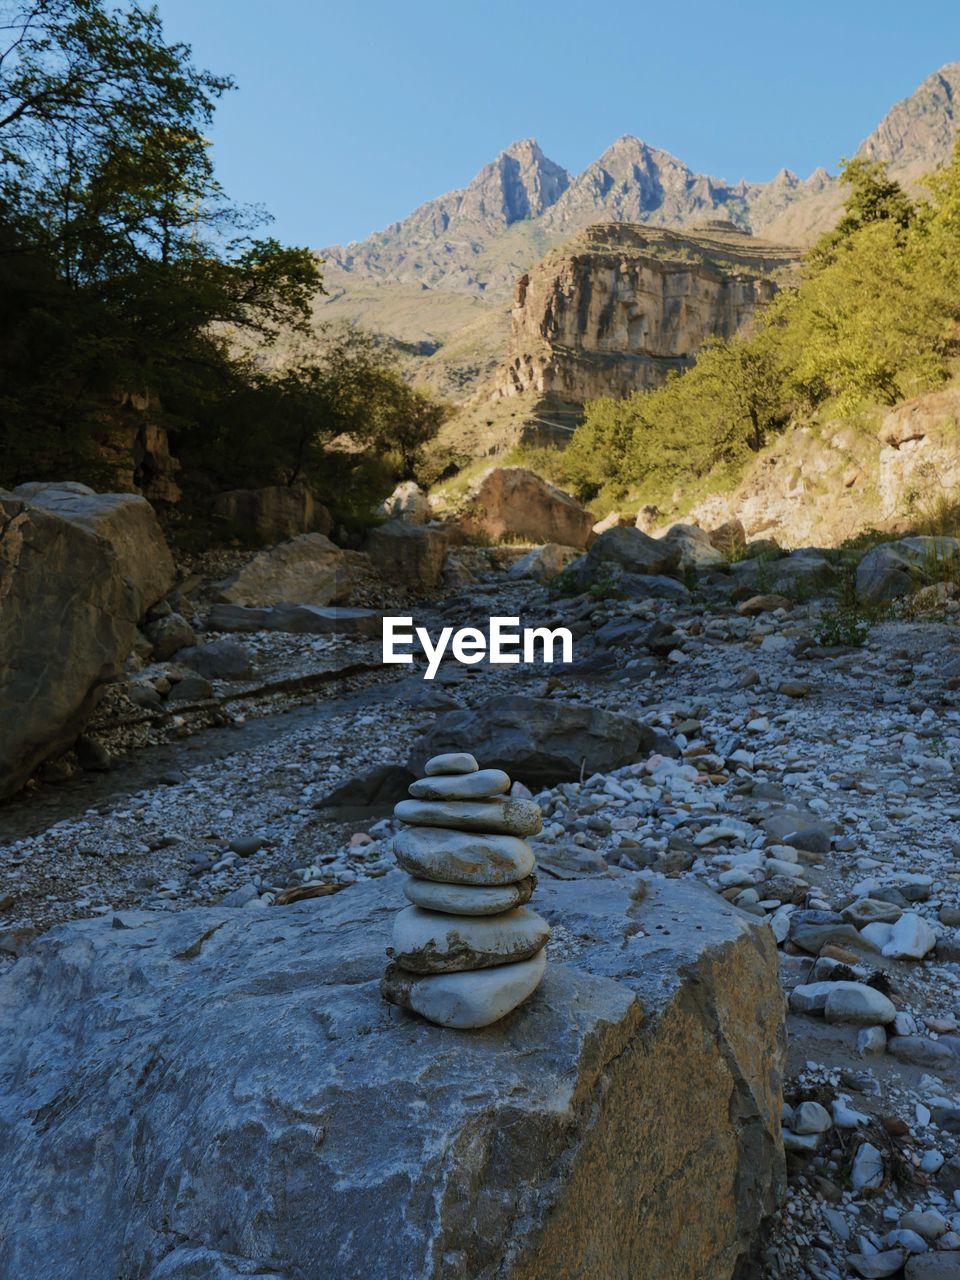 VIEW OF ROCKS AND MOUNTAIN